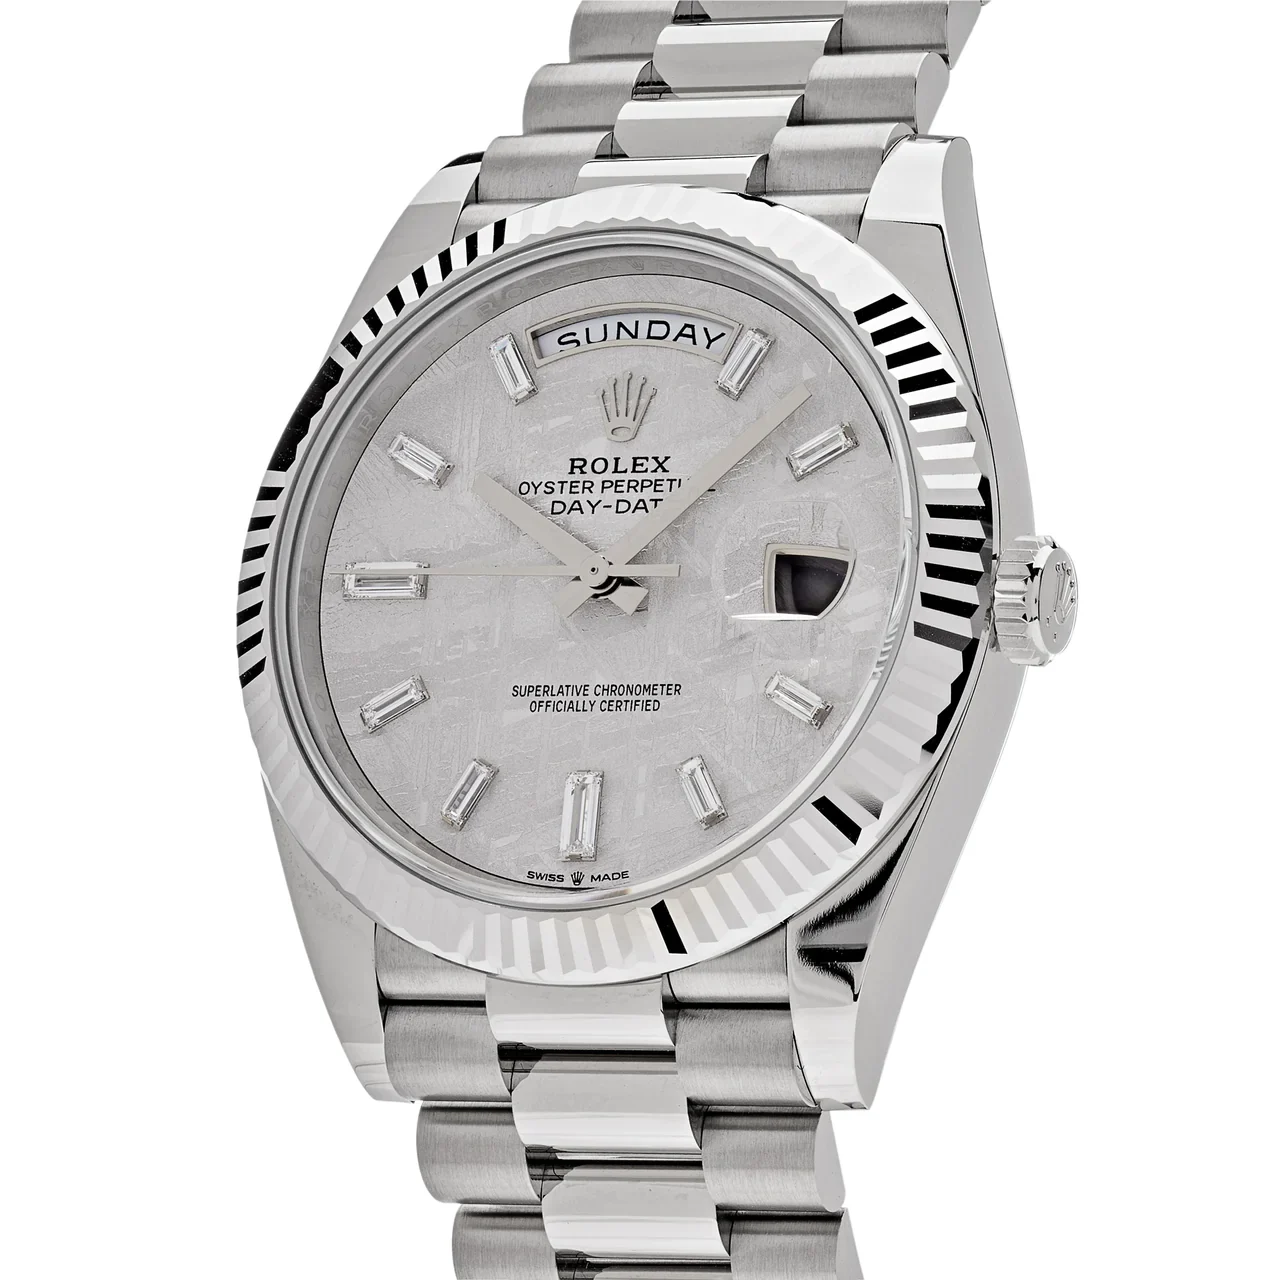 2021 Rolex Day-Date 40 White Gold / Fluted / Meteorite / Baguette Diamond-Set / President 228239-0055 Listing Image 2